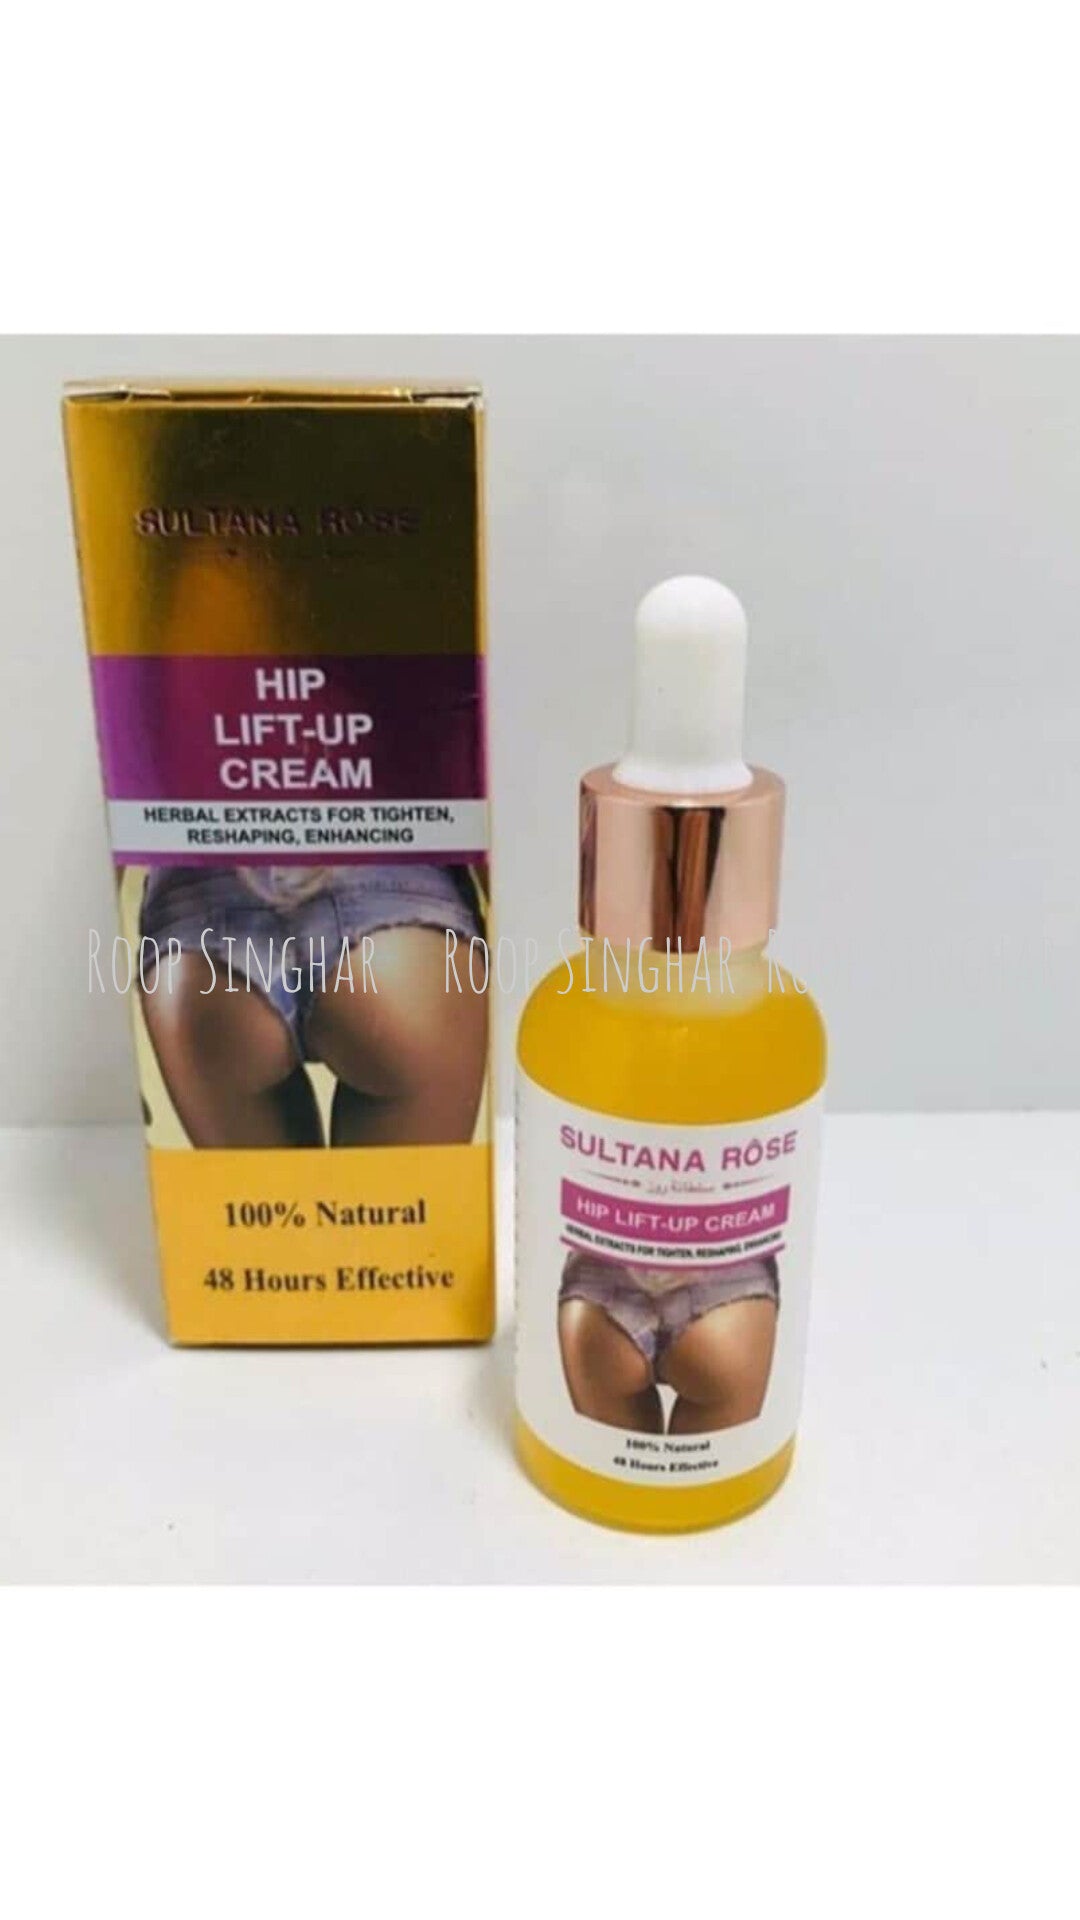 SULTANA ROSE HIP LIFT_UP CREAM Herbal Extracts For Tighten, Reshaping, Enhancing 100% Natural 48 Hours Effective (30ml)